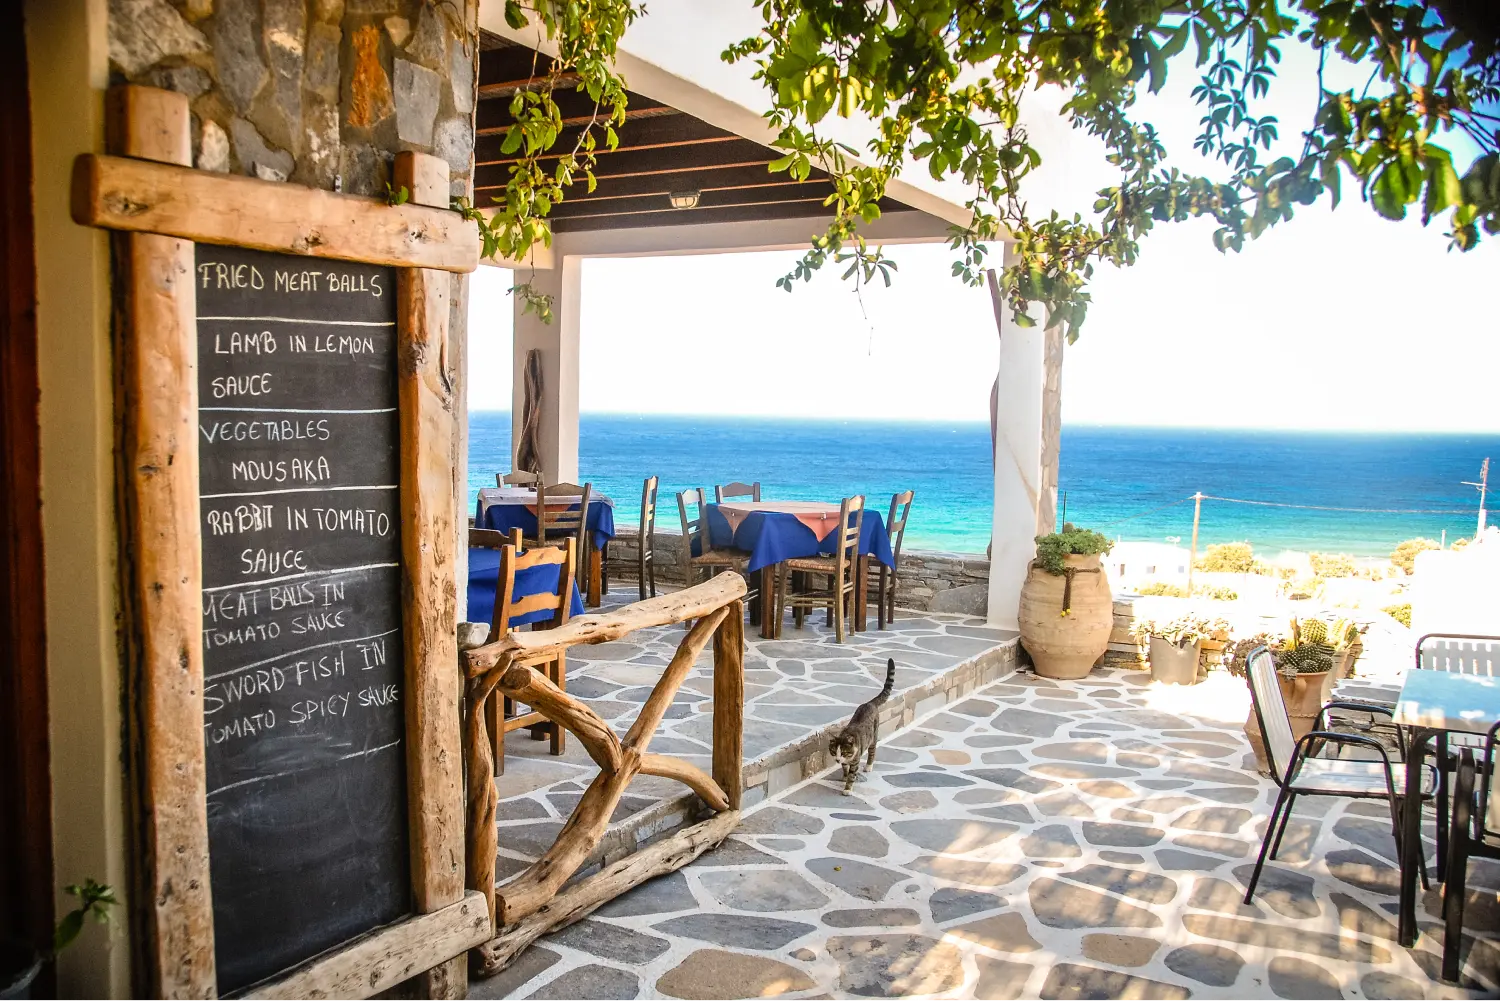 A tavern in Ios, overlooking the blue sea